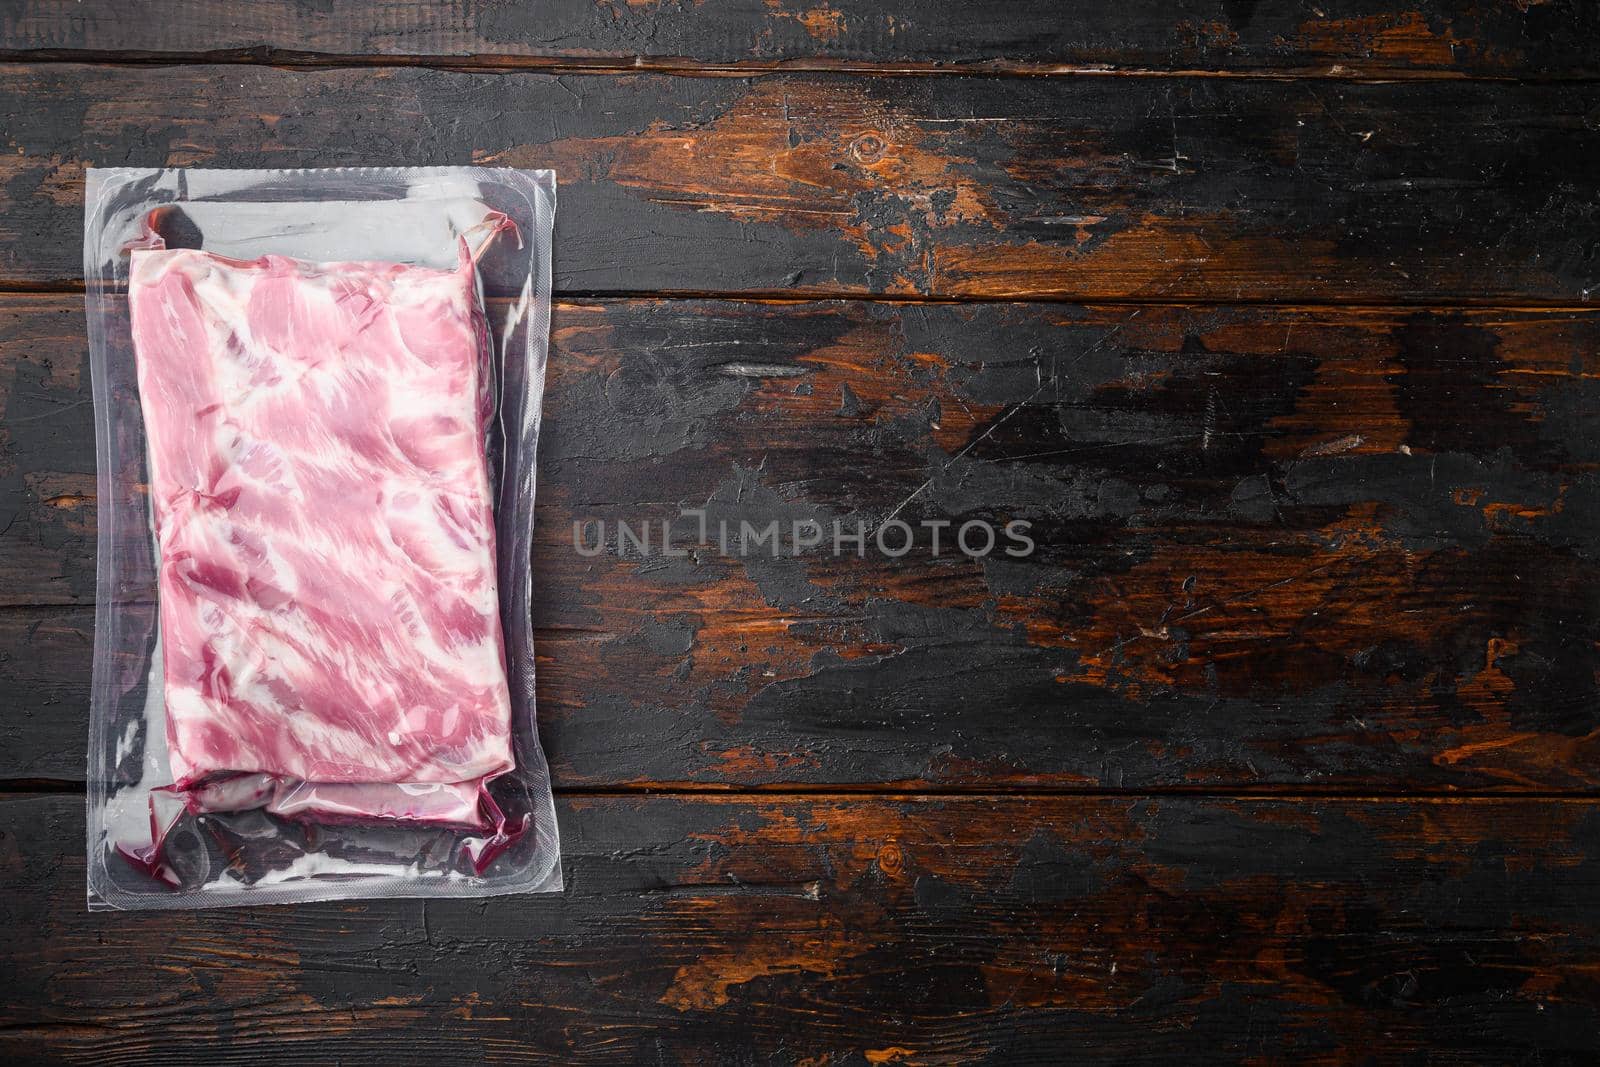 Pork ribs in a vacuum bag, on old dark wooden table background, top view flat lay, with copy space for text by Ilianesolenyi